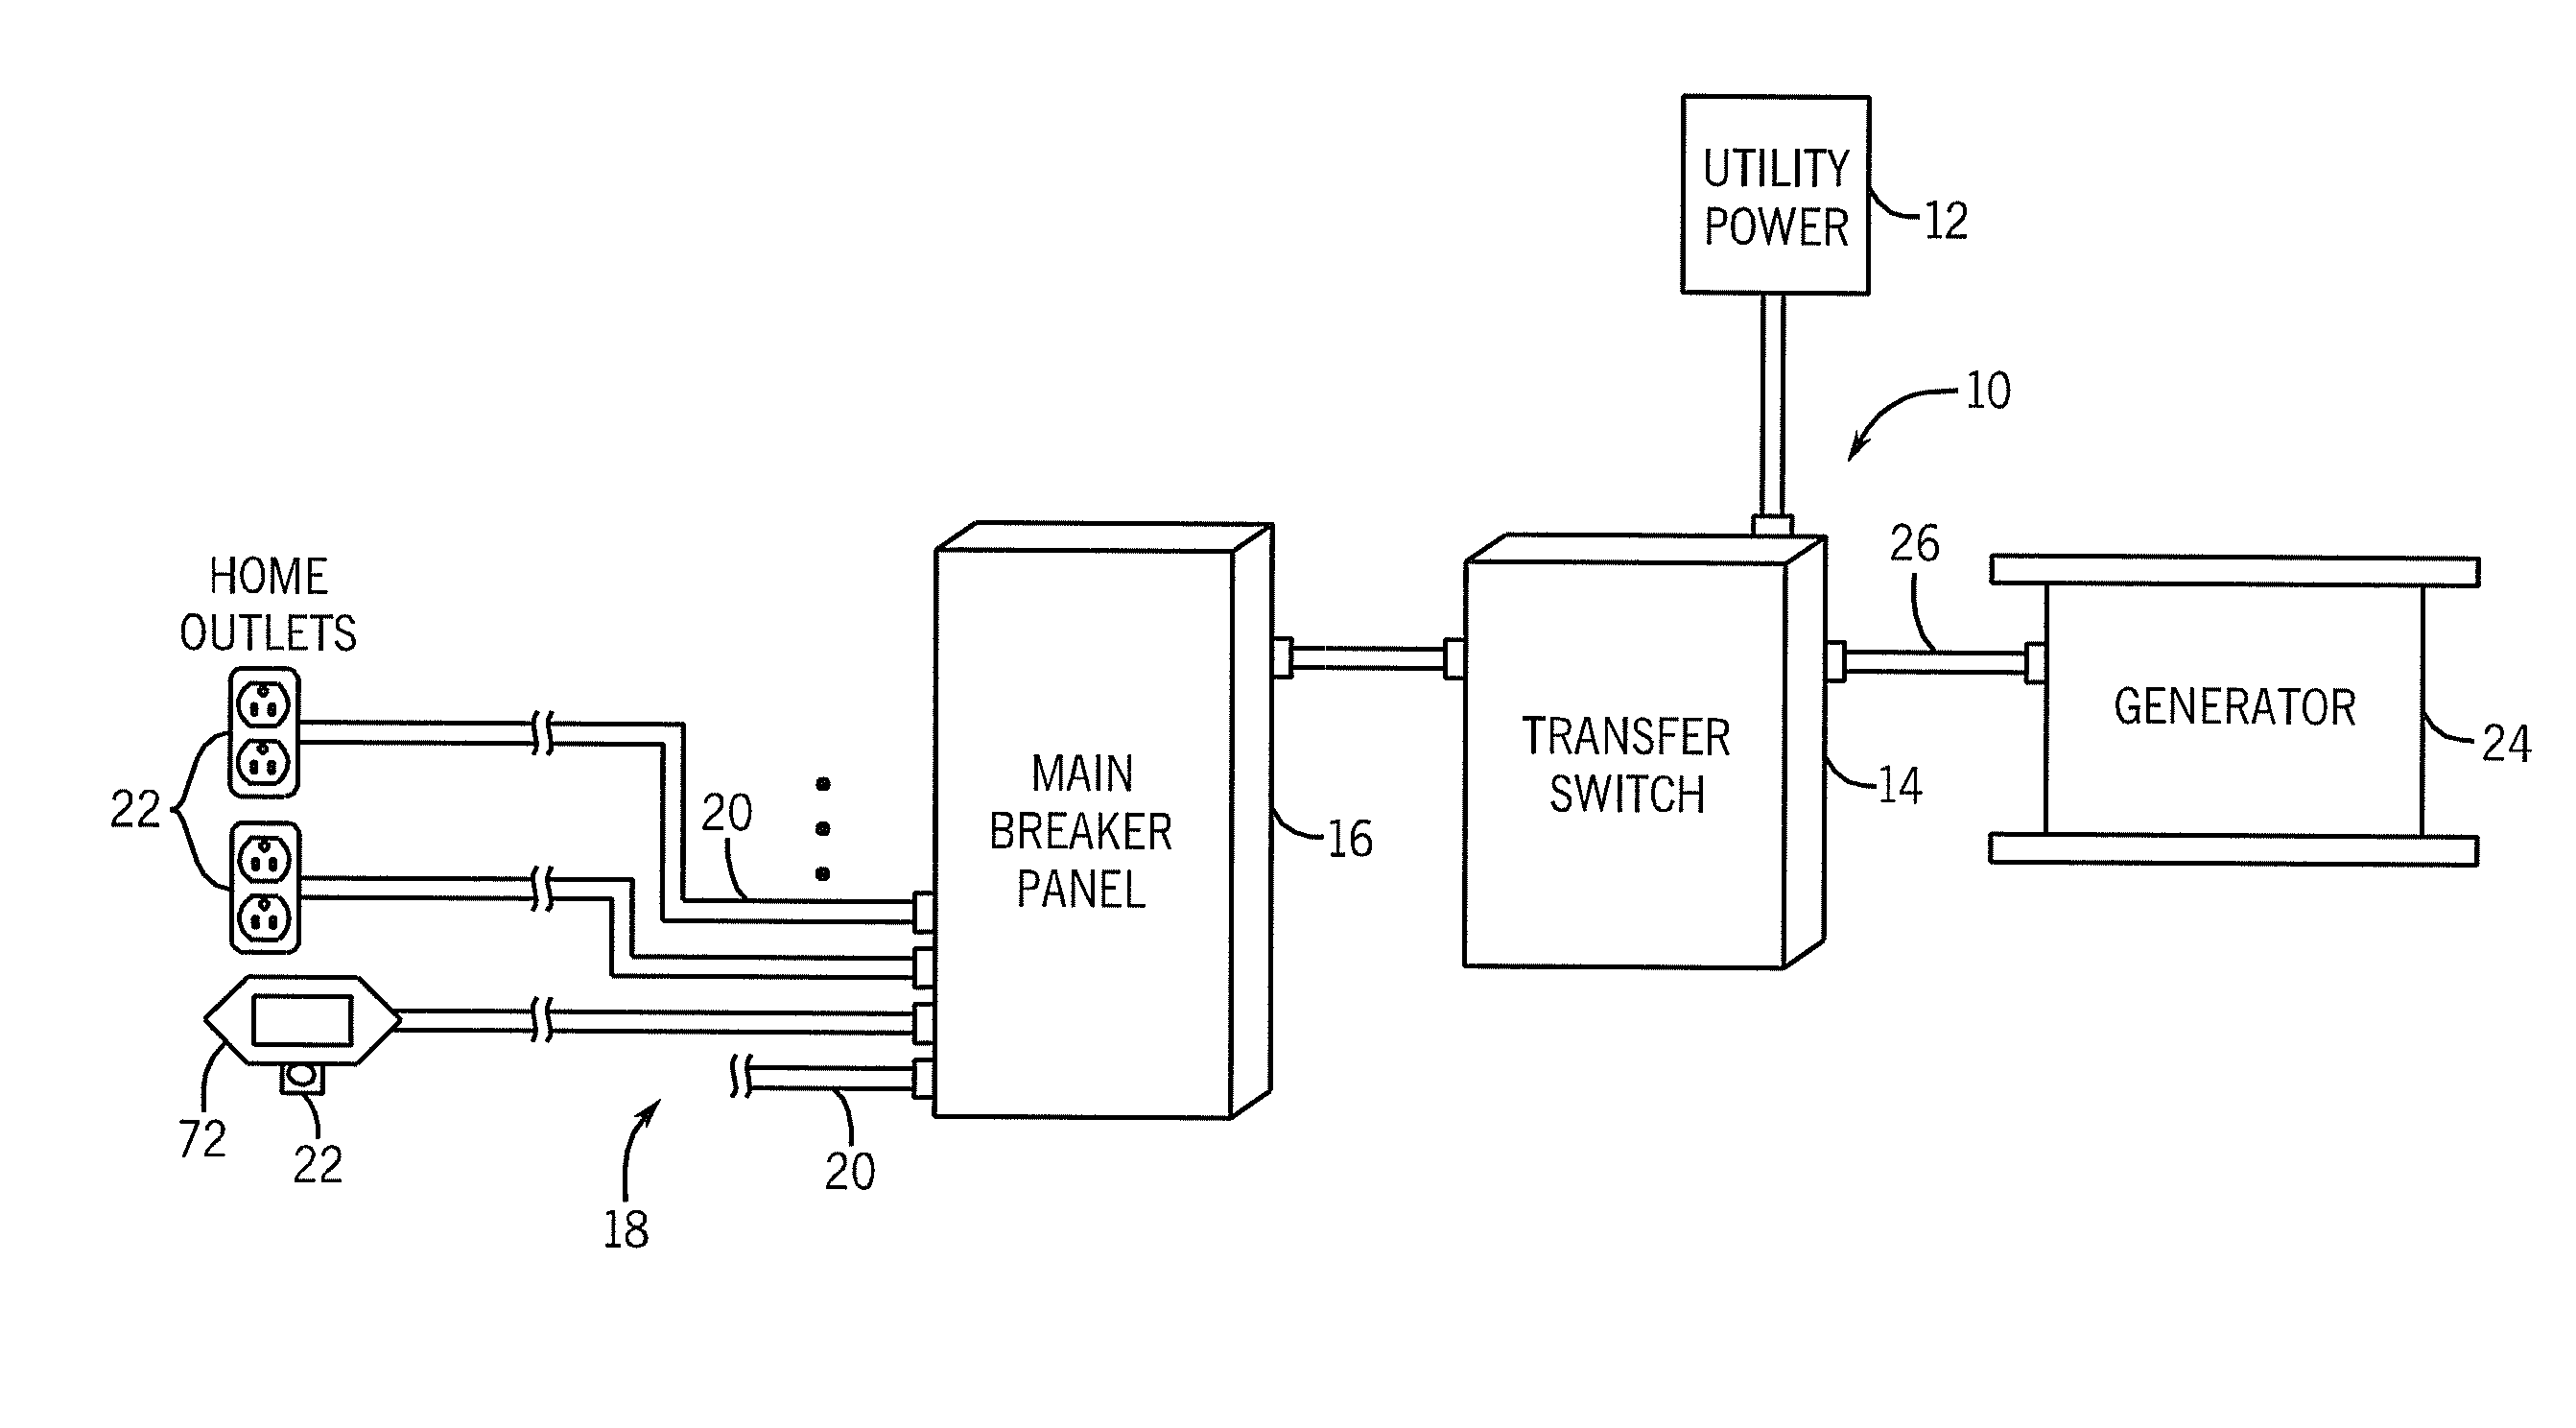 Power line carrier (PLC) communication of standby generator status